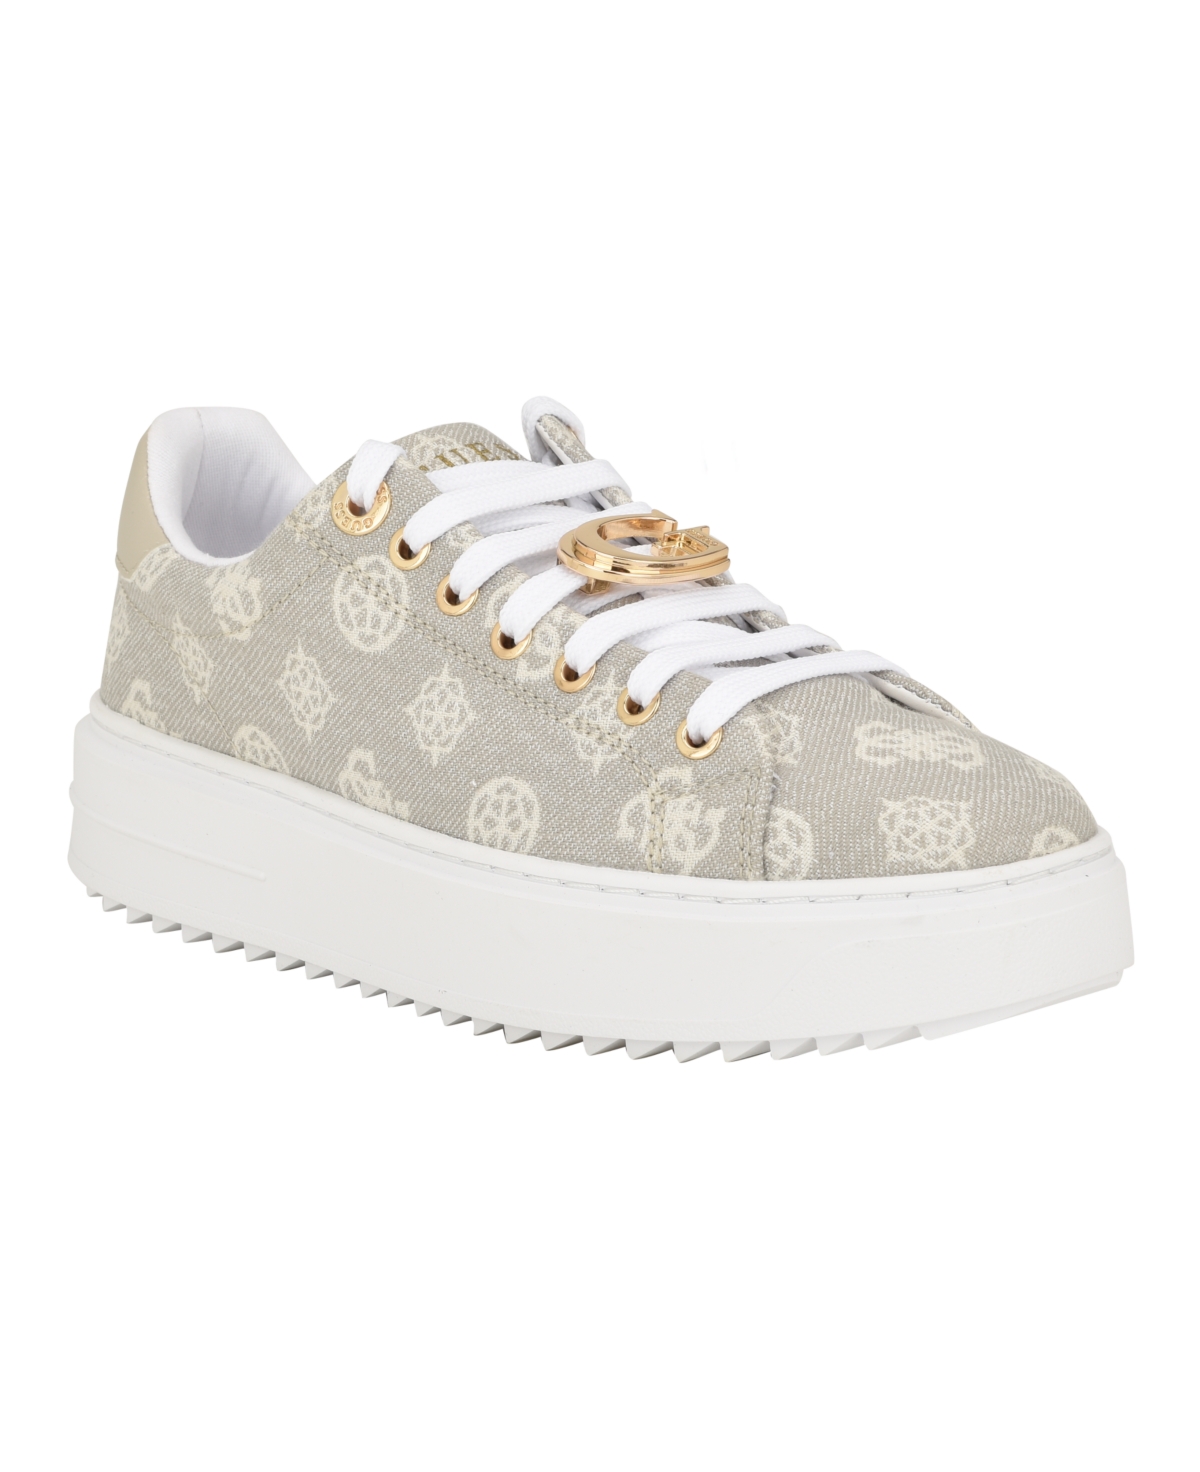 Guess Women's Genza Platform Lace Up Round Toe Sneakers In Ivory Multi